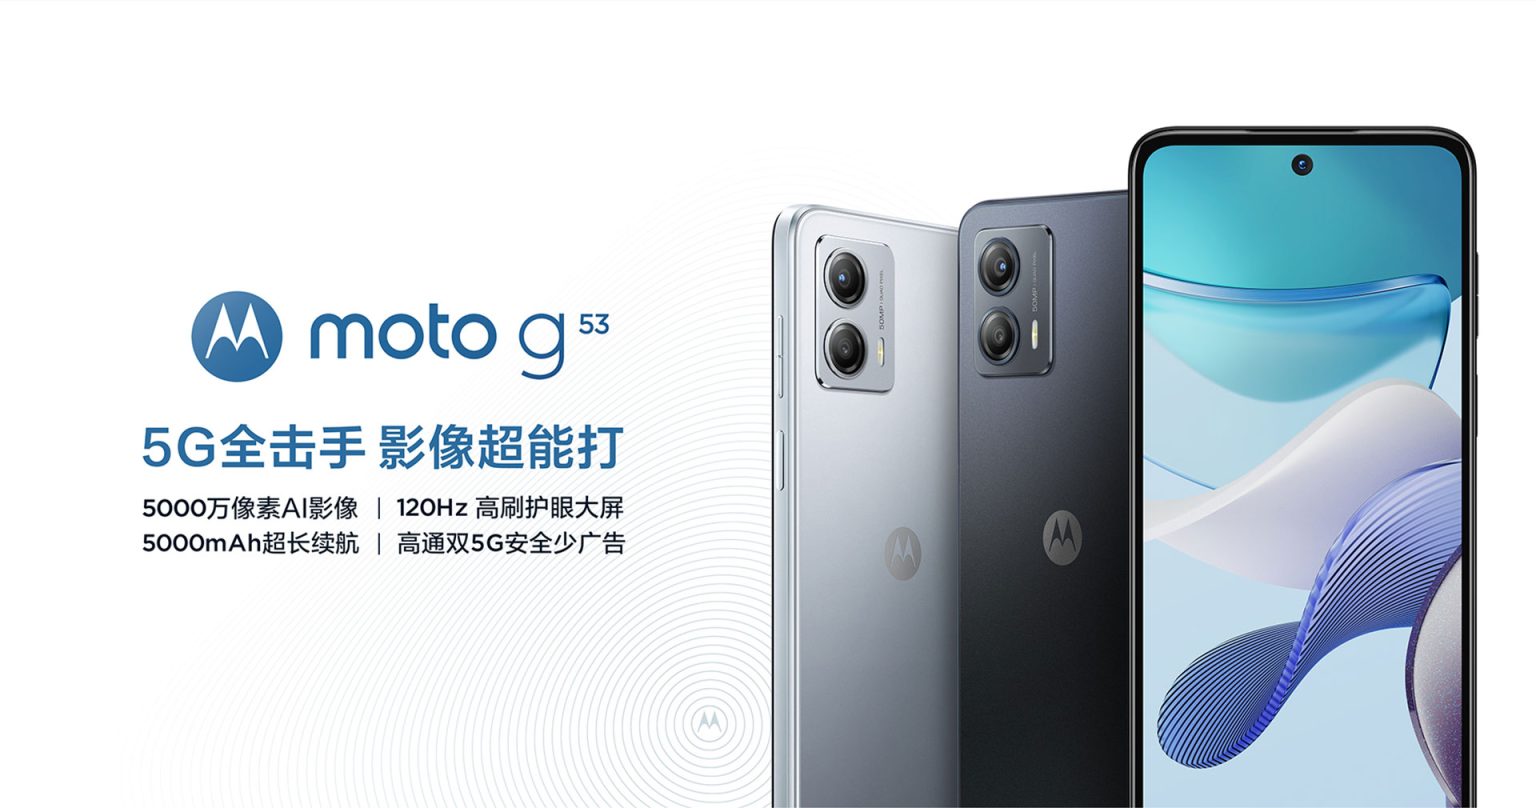 AHIW5umZpq9ay81YFFXh8umV7 1346 1536x808 - Moto G53 finally Launched With 120Hz Display, 50MP Camera, and more